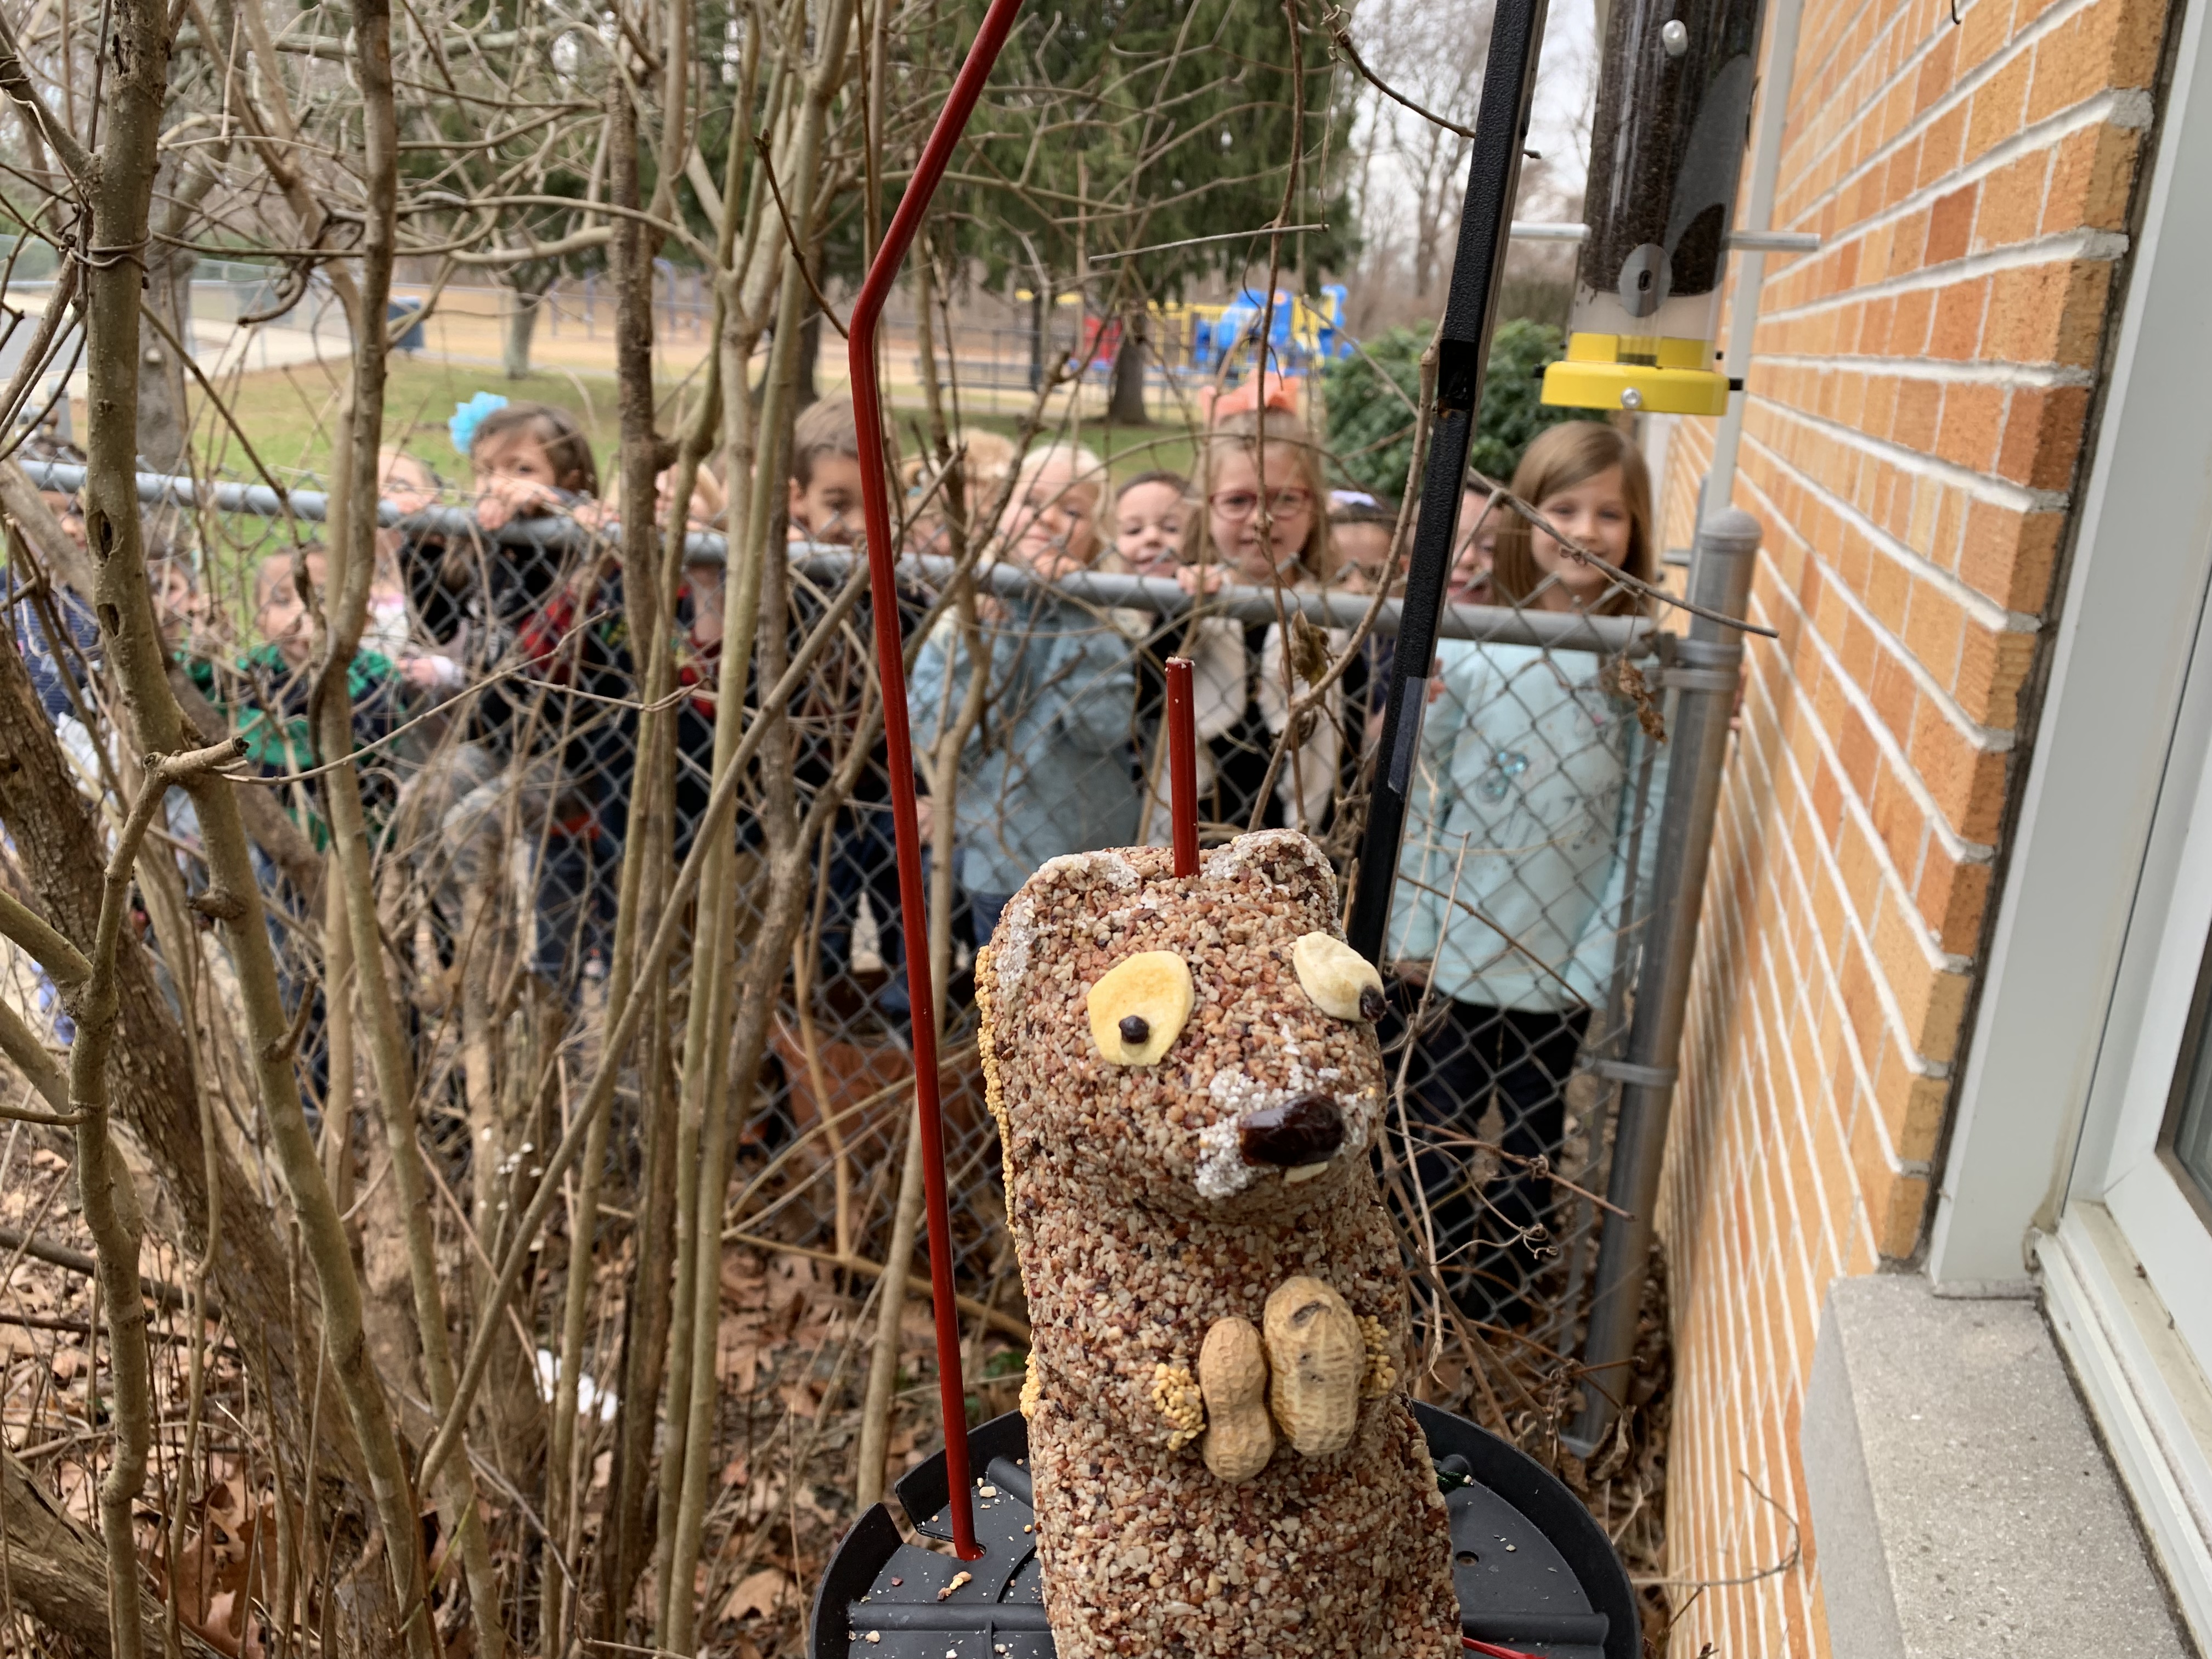 Elizabeth Mullee's class watching feeders from behind a fence, all with smiling faces!